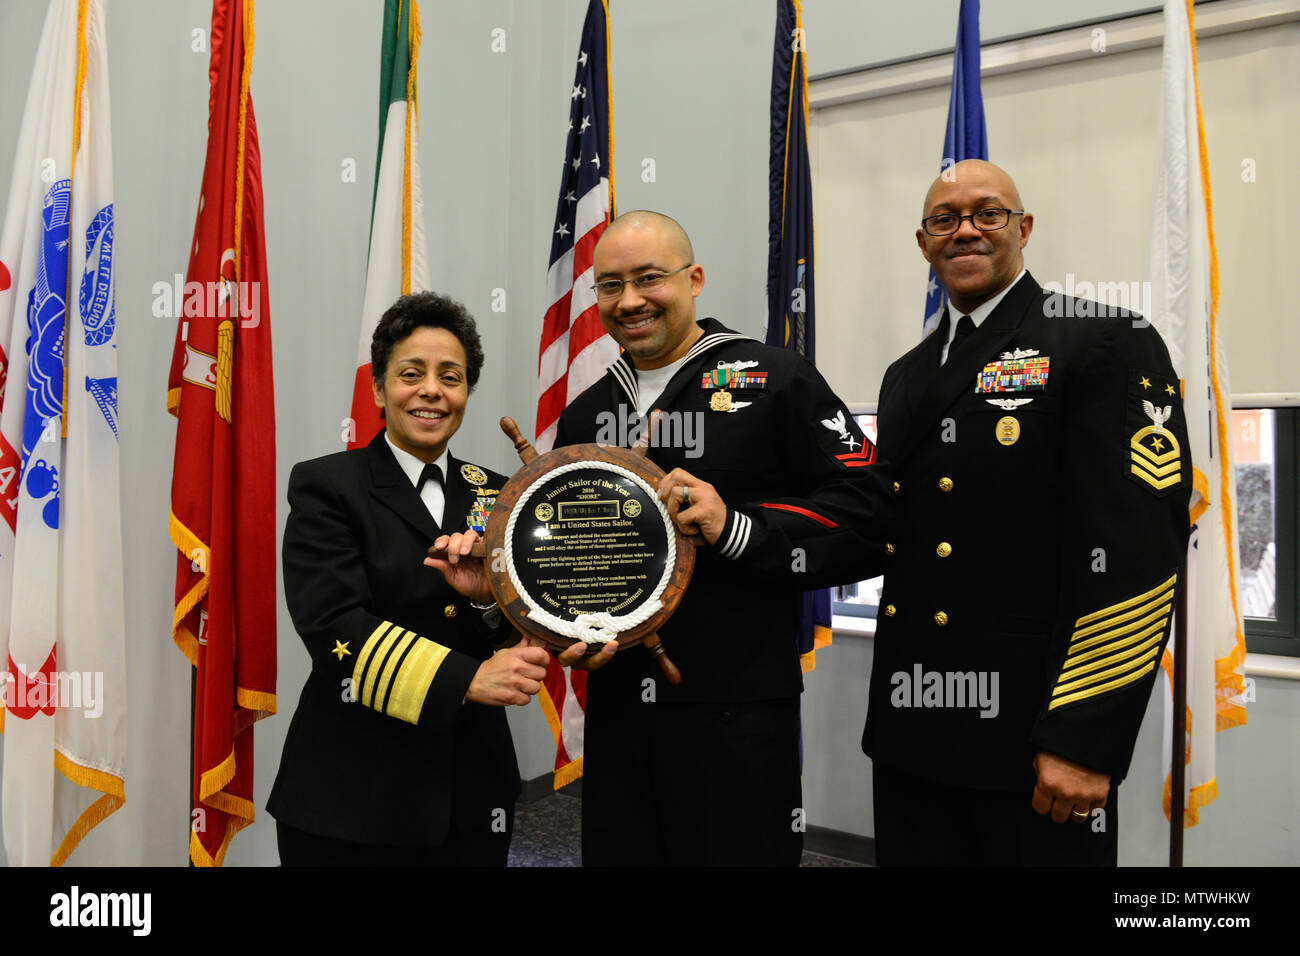 170127-N-SS492-629 NAVAL SUPPORT ACTIVITY NAPLES, Italy (Jan. 27, 2017) From left to right: Commander, U.S. Naval Forces Europe-Africa, Adm. Michelle Howard; U.S. Naval Forces Europe-Africa Junior Sailor of the Year Yeoman 2nd Class Eric Horne and U.S. Naval Forces Europe-Africa Fleet Master Chief Raymond D. Kemp Sr. pose for a photo as Howard presents Horne with a plaque at the Commander, U.S. Naval Forces Europe-Africa Sailor of the Year ceremony Jan. 27, 2017.  U.S. Naval Forces Europe-Africa, headquartered in Naples, Italy, oversees joint and naval operations, often in concert with allied, Stock Photo